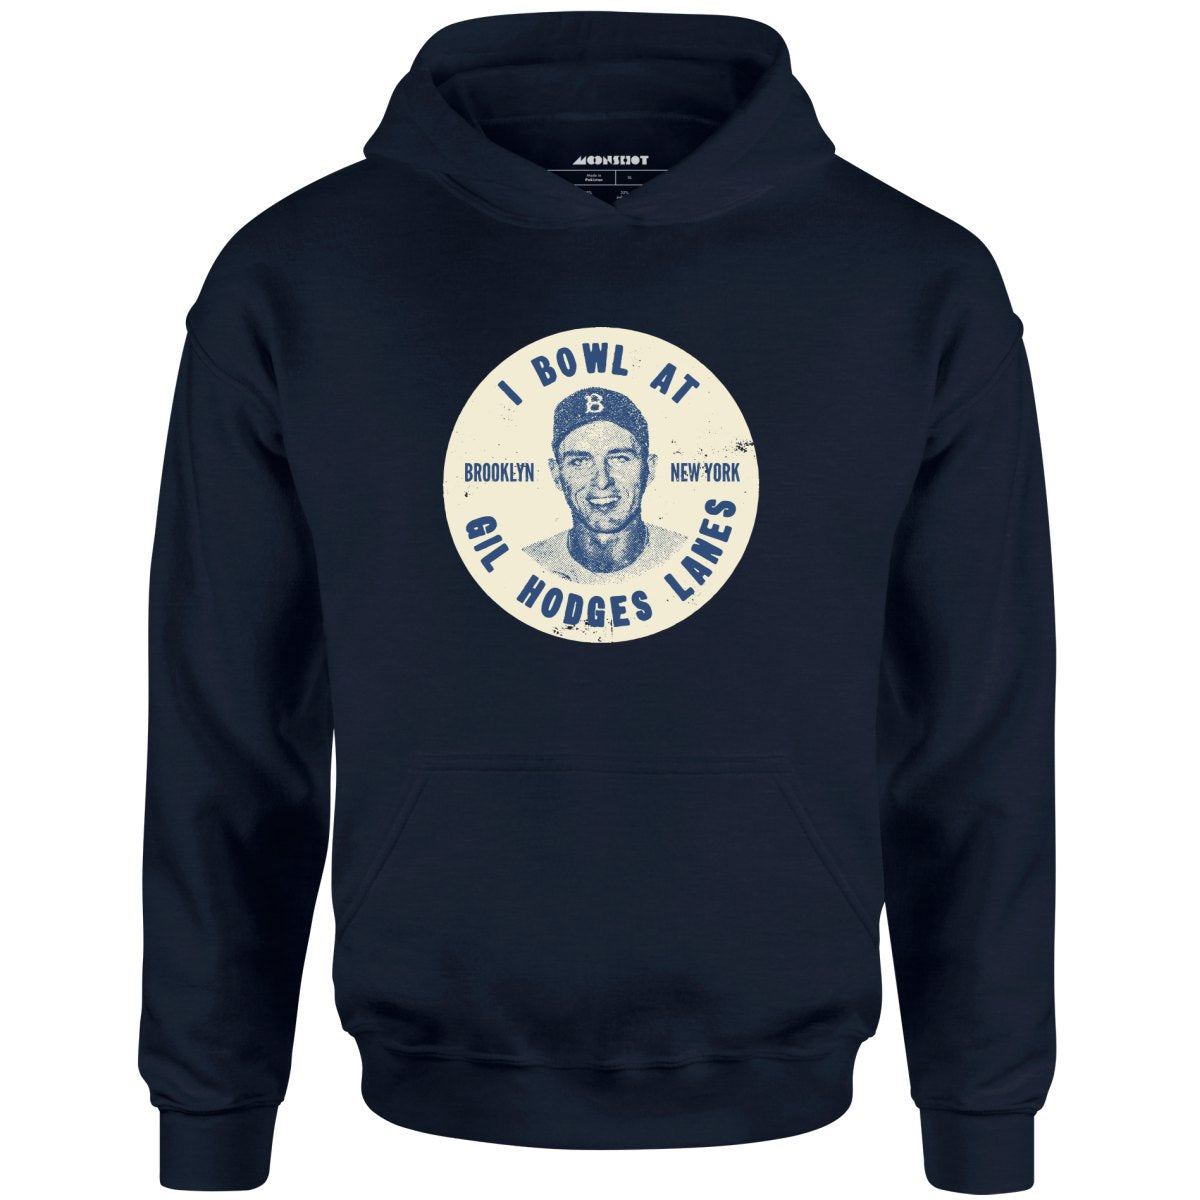 Gil Hodges Lanes - Brooklyn, NY - Vintage Bowling Alley - Unisex Hoodie